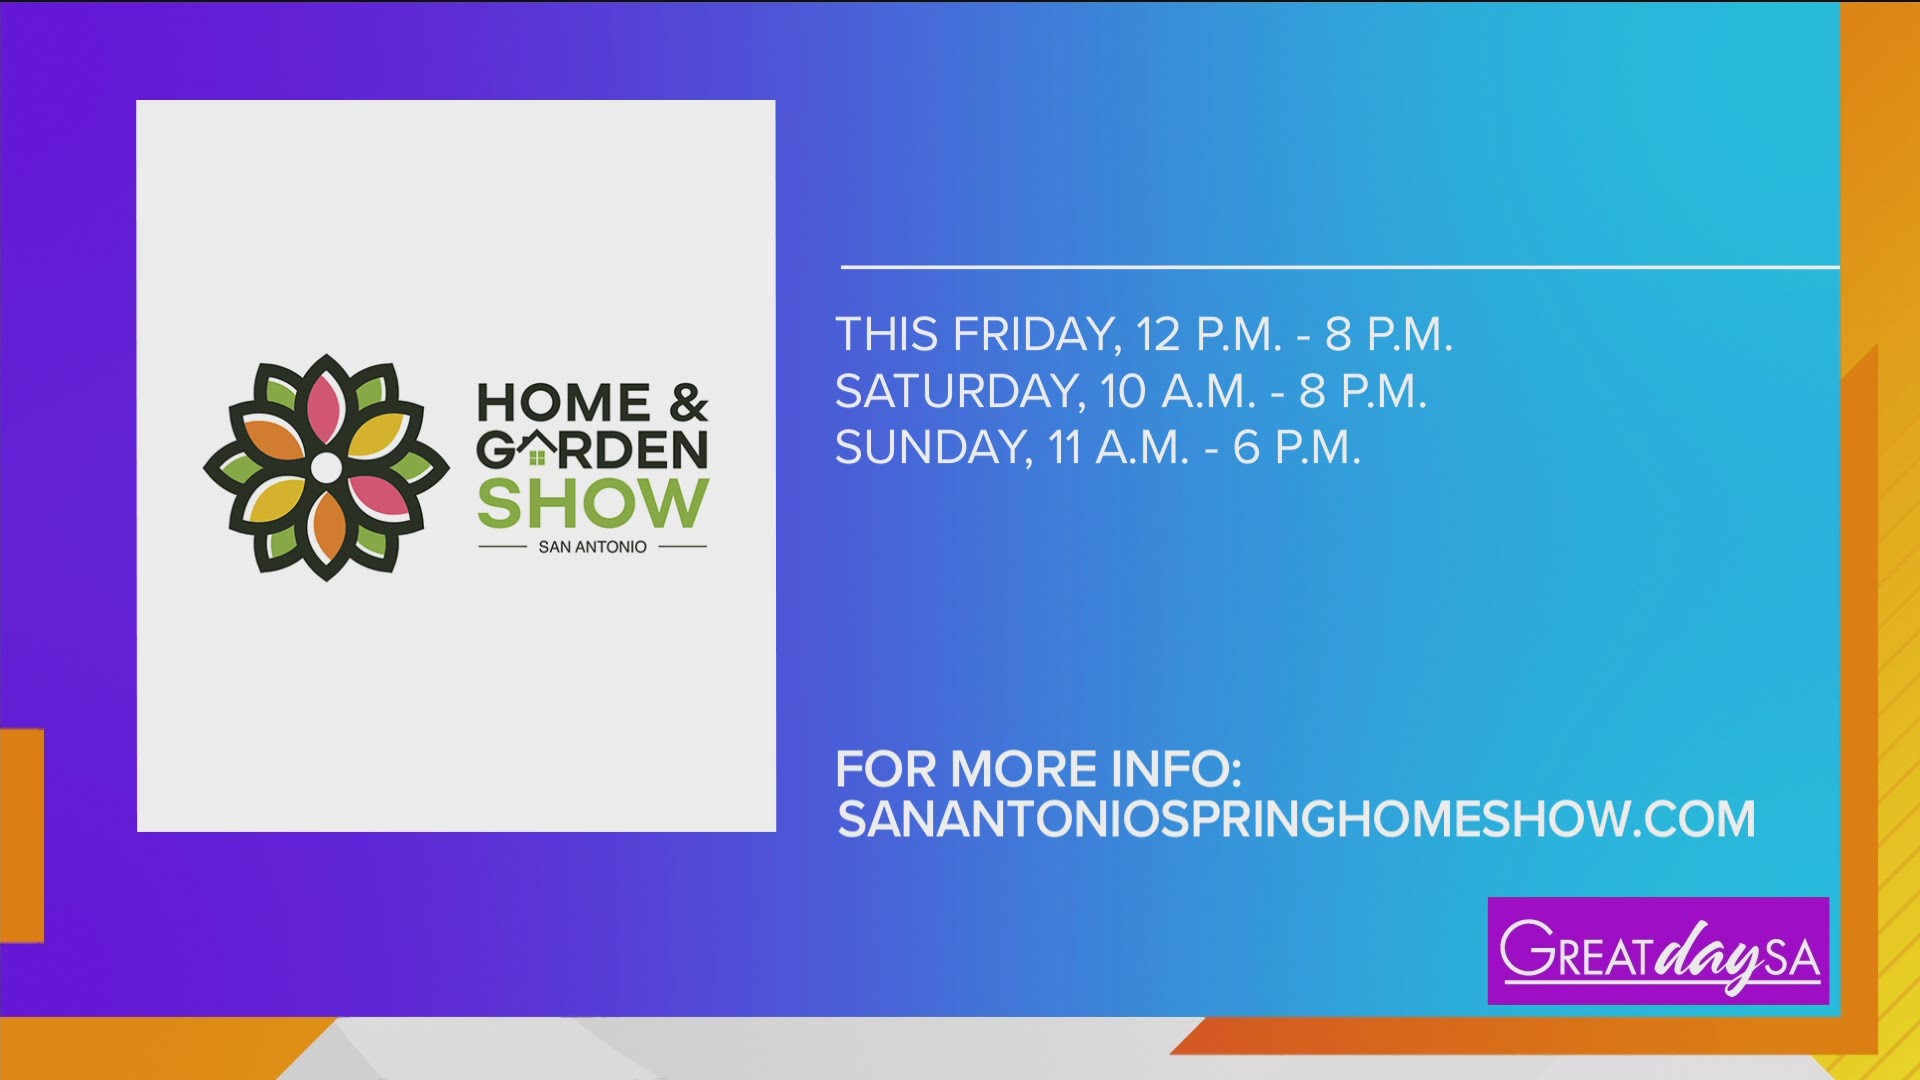 If you're looking for some Spring decor inspiration the Home & Garden Show is back in town!